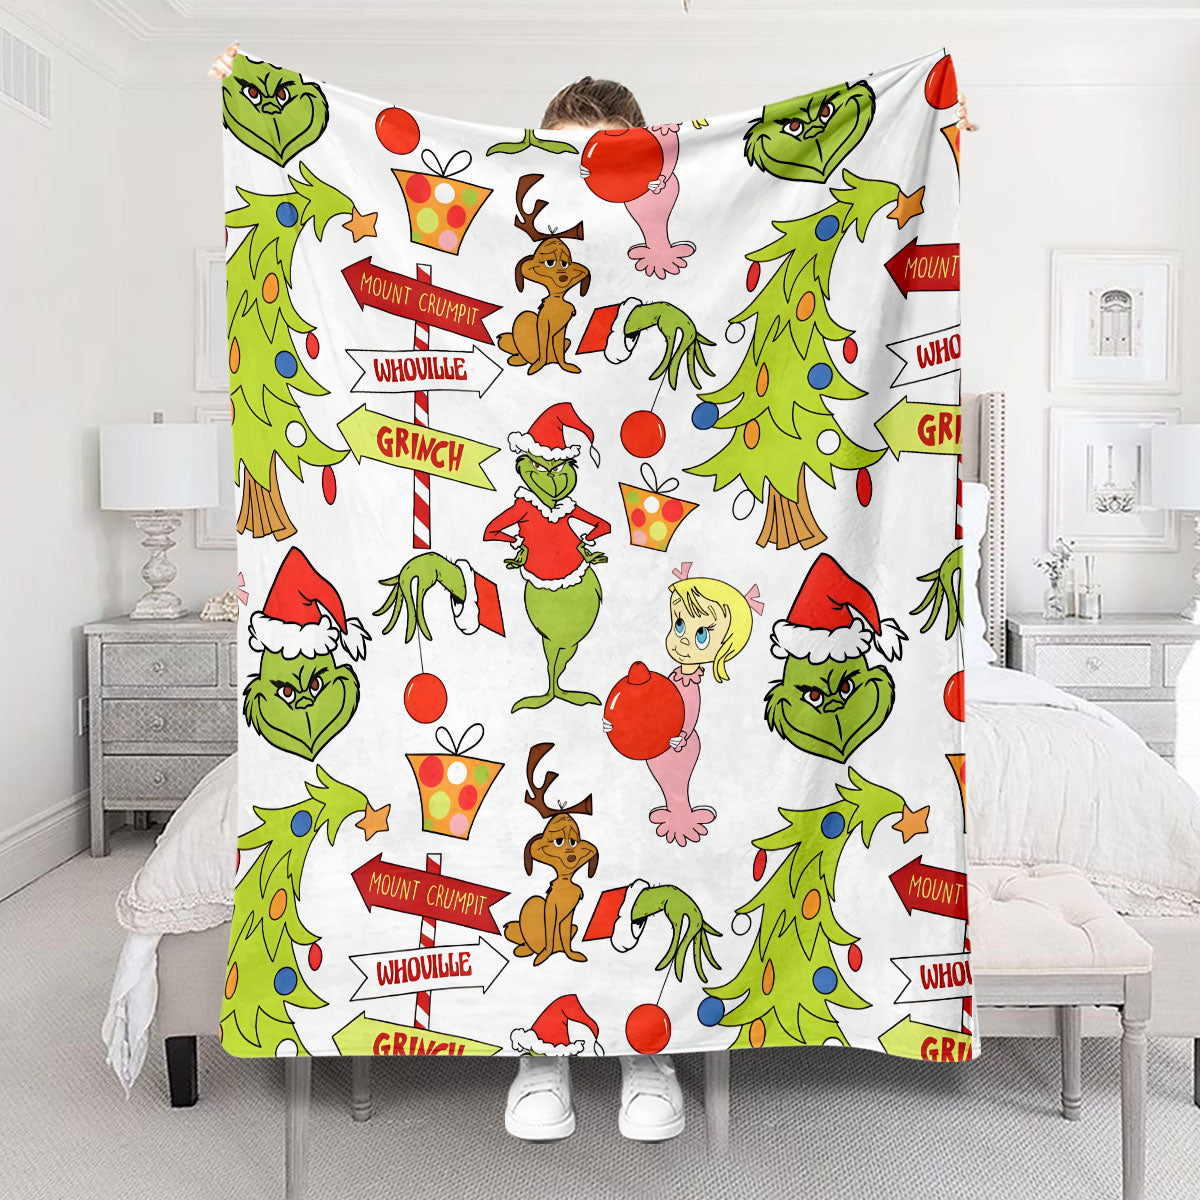 A Very Merry Christmas - Stole Christmas Blanket